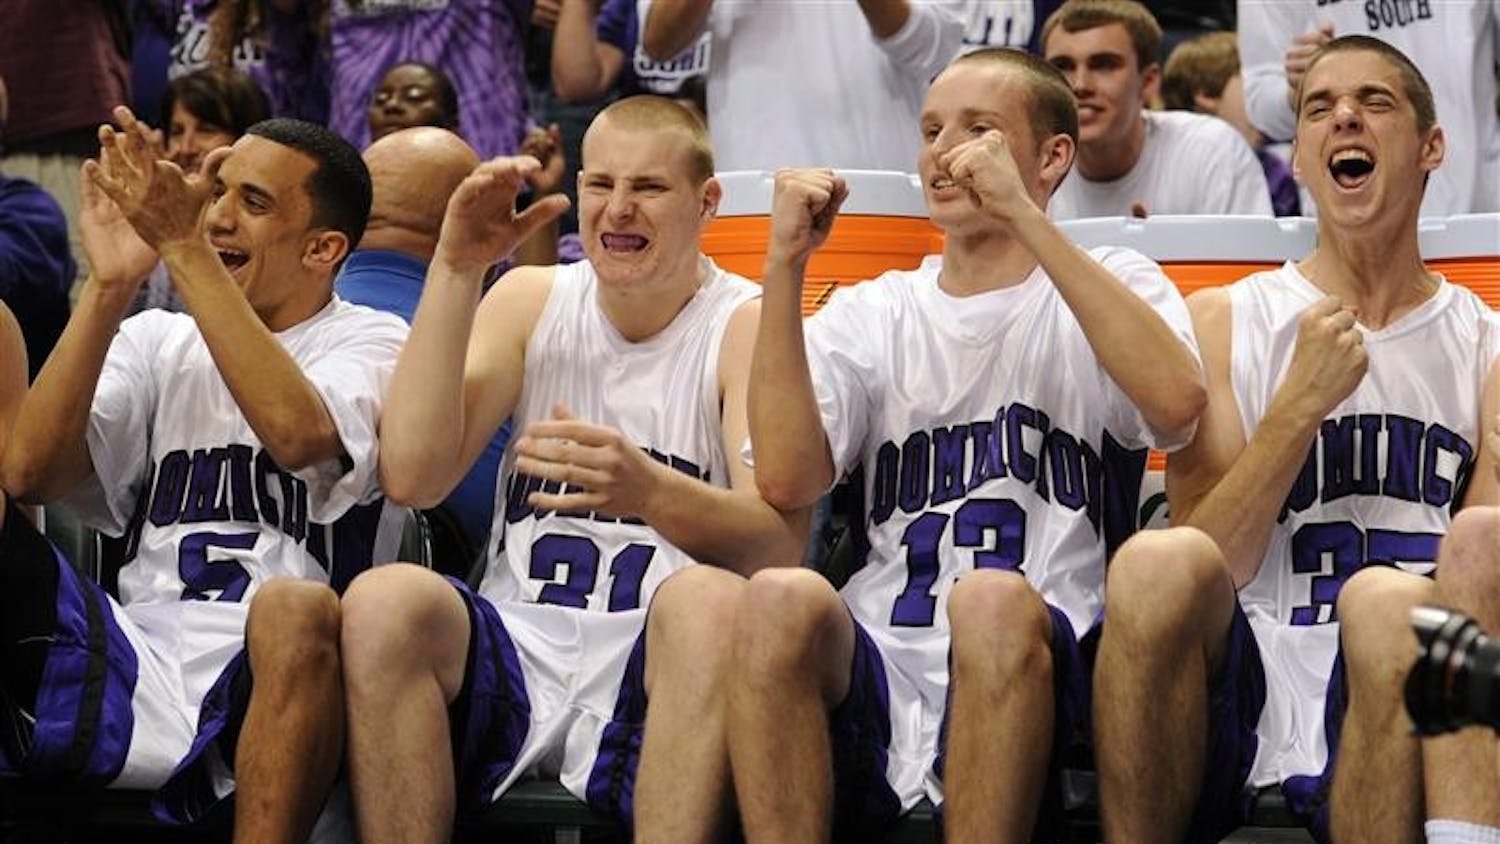 Bloomington South players, from left, Rickey Washington, Marcus Etnier, Brandon French and Curtis Payton react to a late basket in their 69-62 win over Fort Wayne Snider in the IHSAA Class 4A boys basketball state finals action at Conseco Fieldhouse on Saturday in Indianapolis.